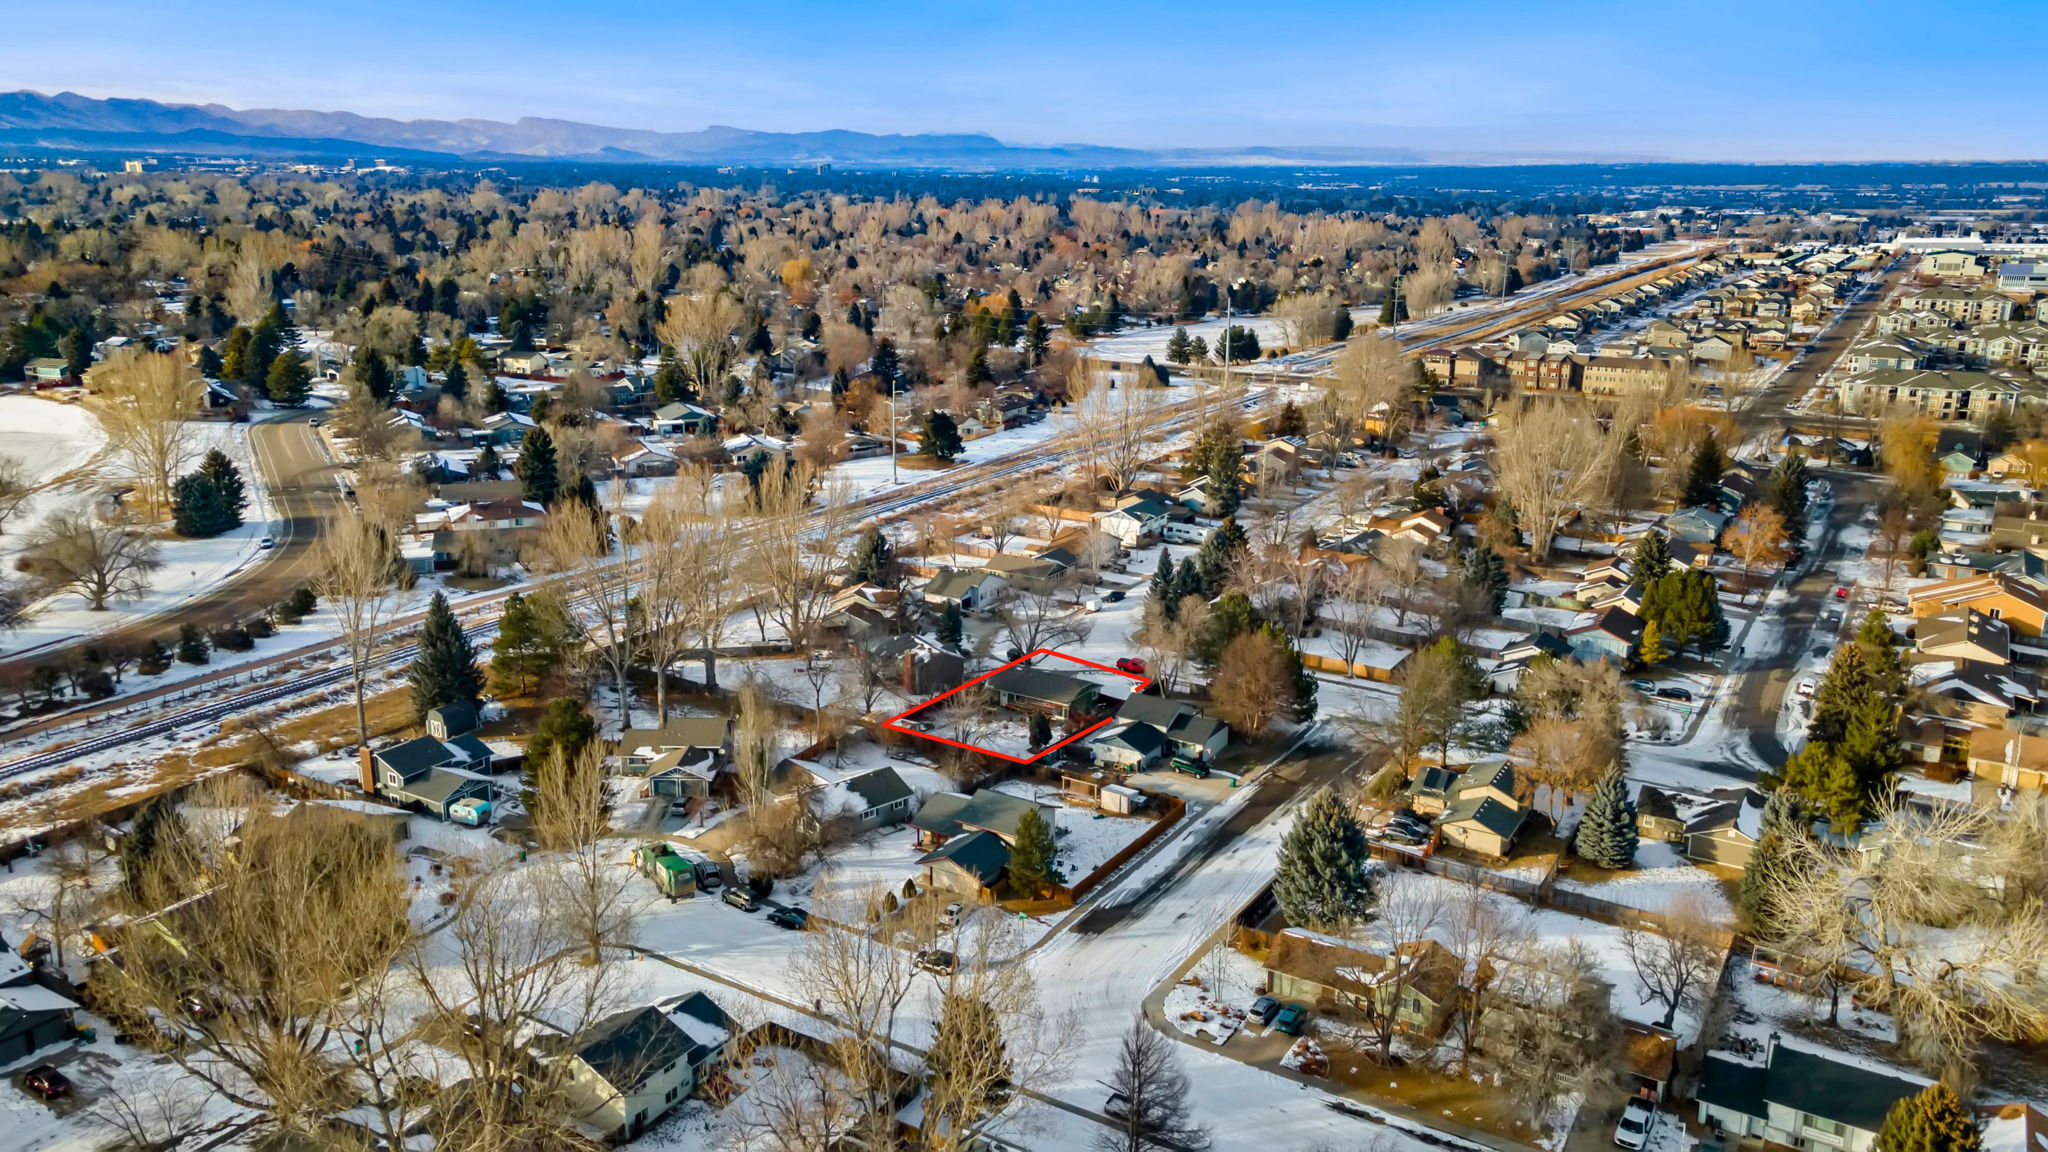 Excellent location near grocery stores, restaurants, bars, breweries, hiking and biking trails, k-12 schools, and quick access to I-25